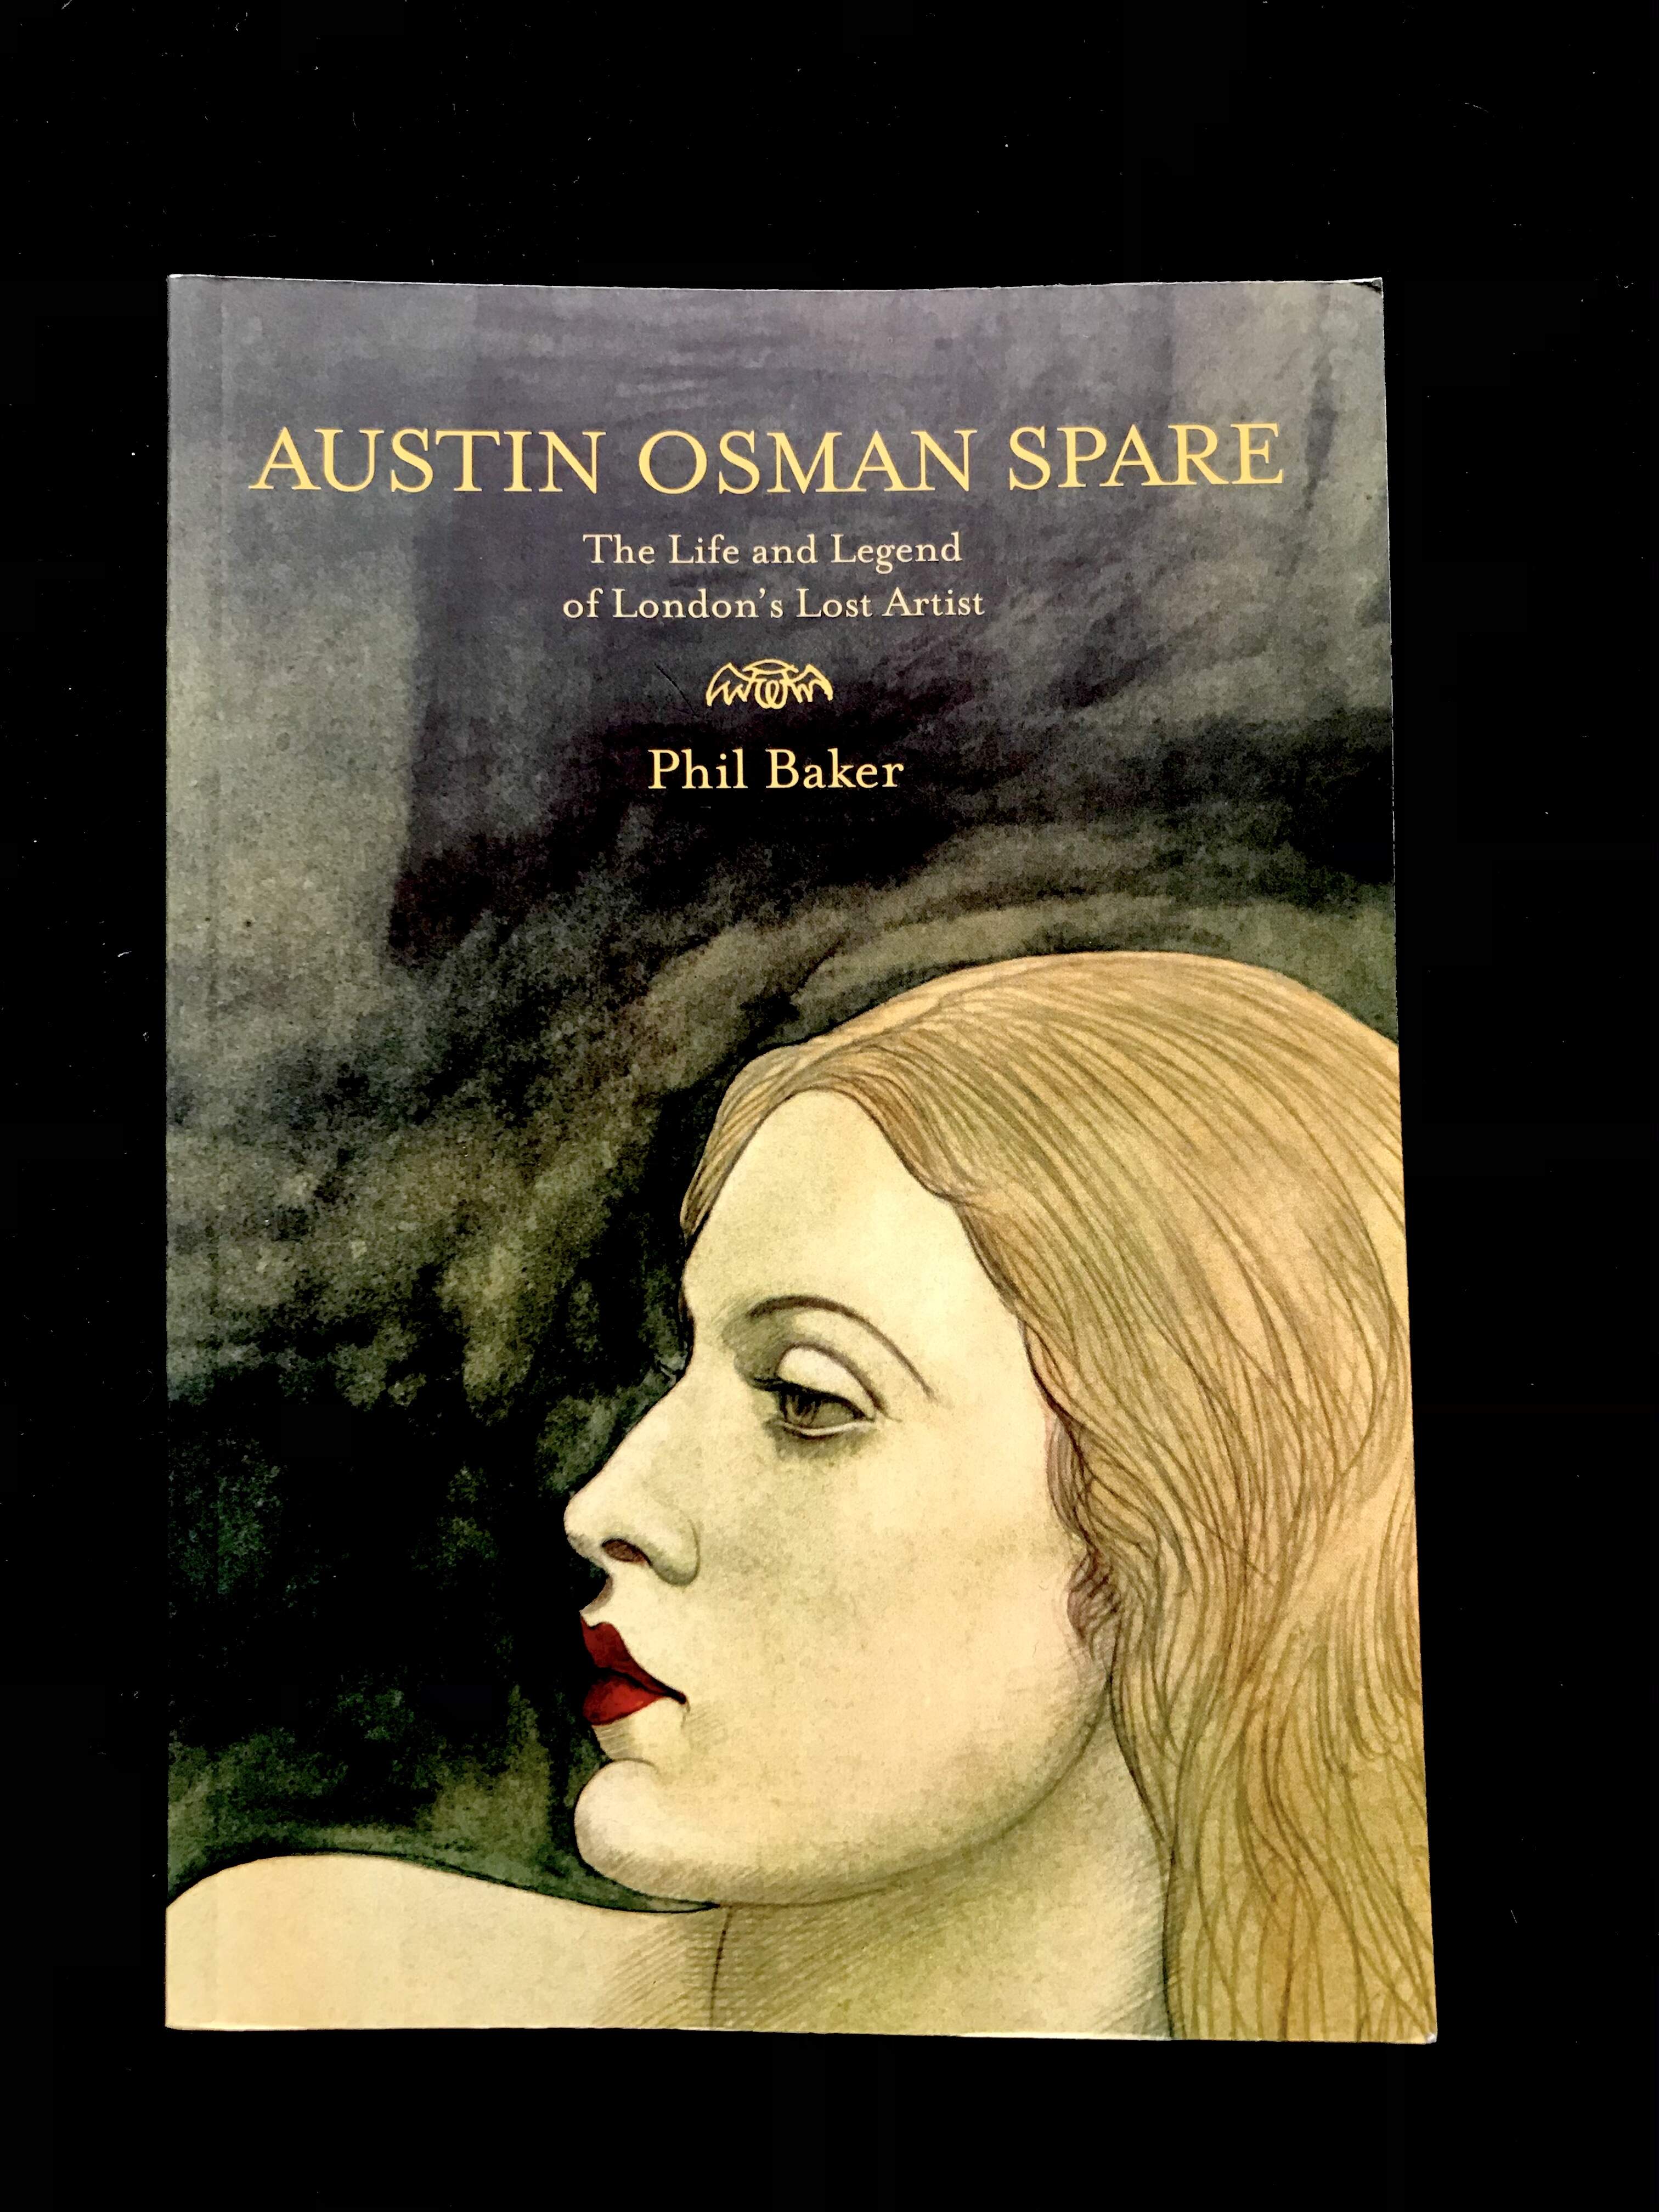 Austin Osman Spare The Life & Legend of London's Lost Artist by Phil Baker